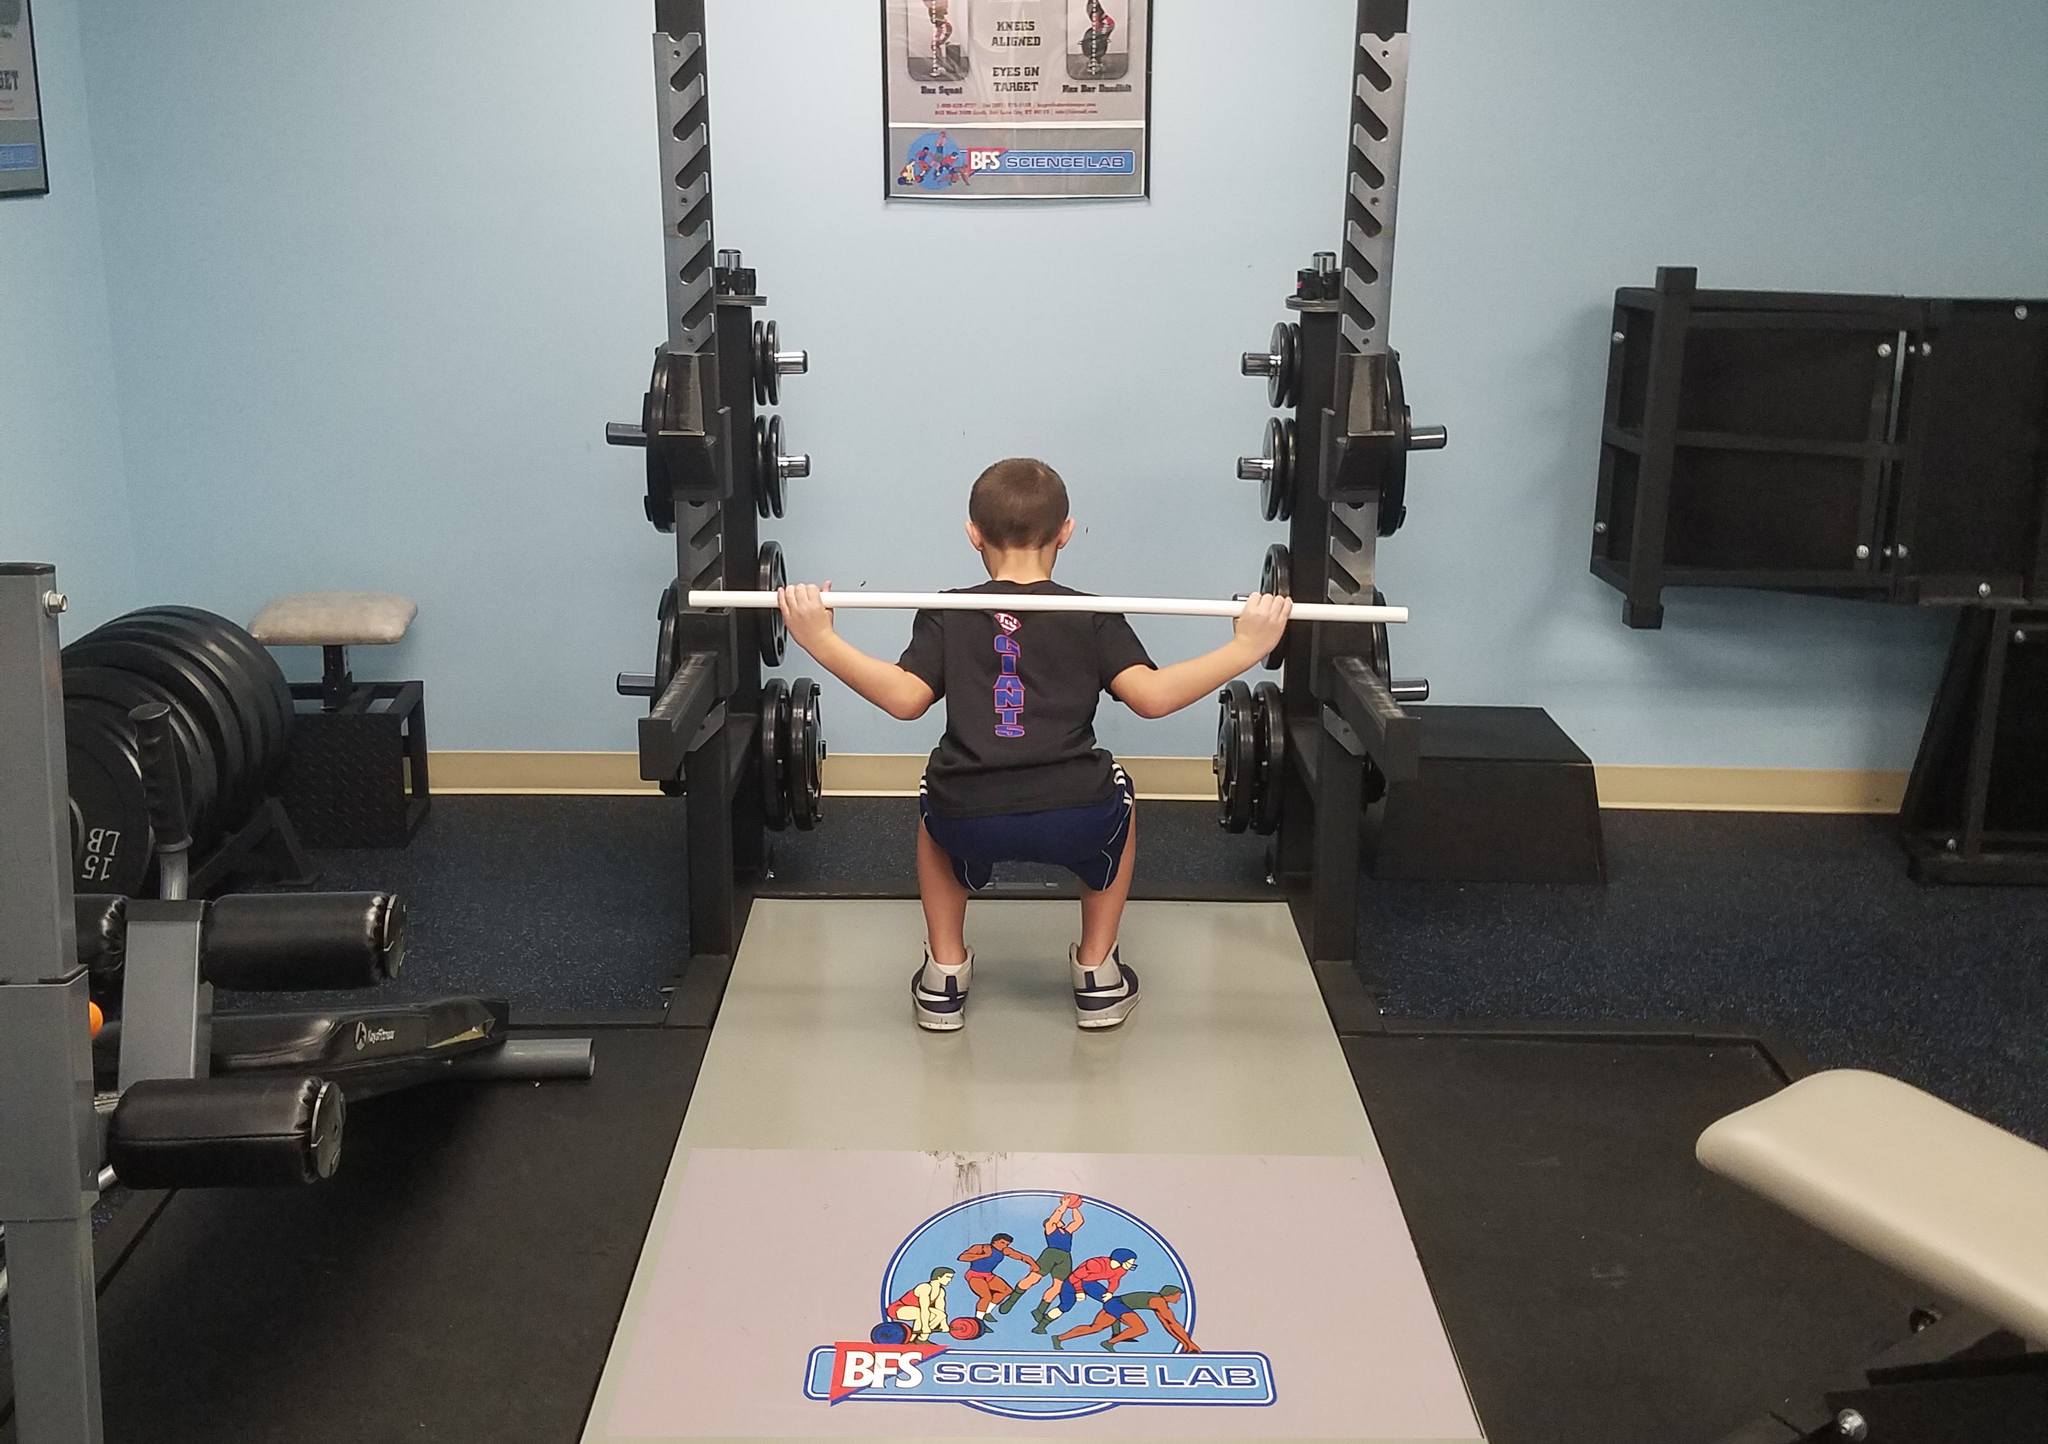 How I learned more from training 9-year olds than from training pro athletes